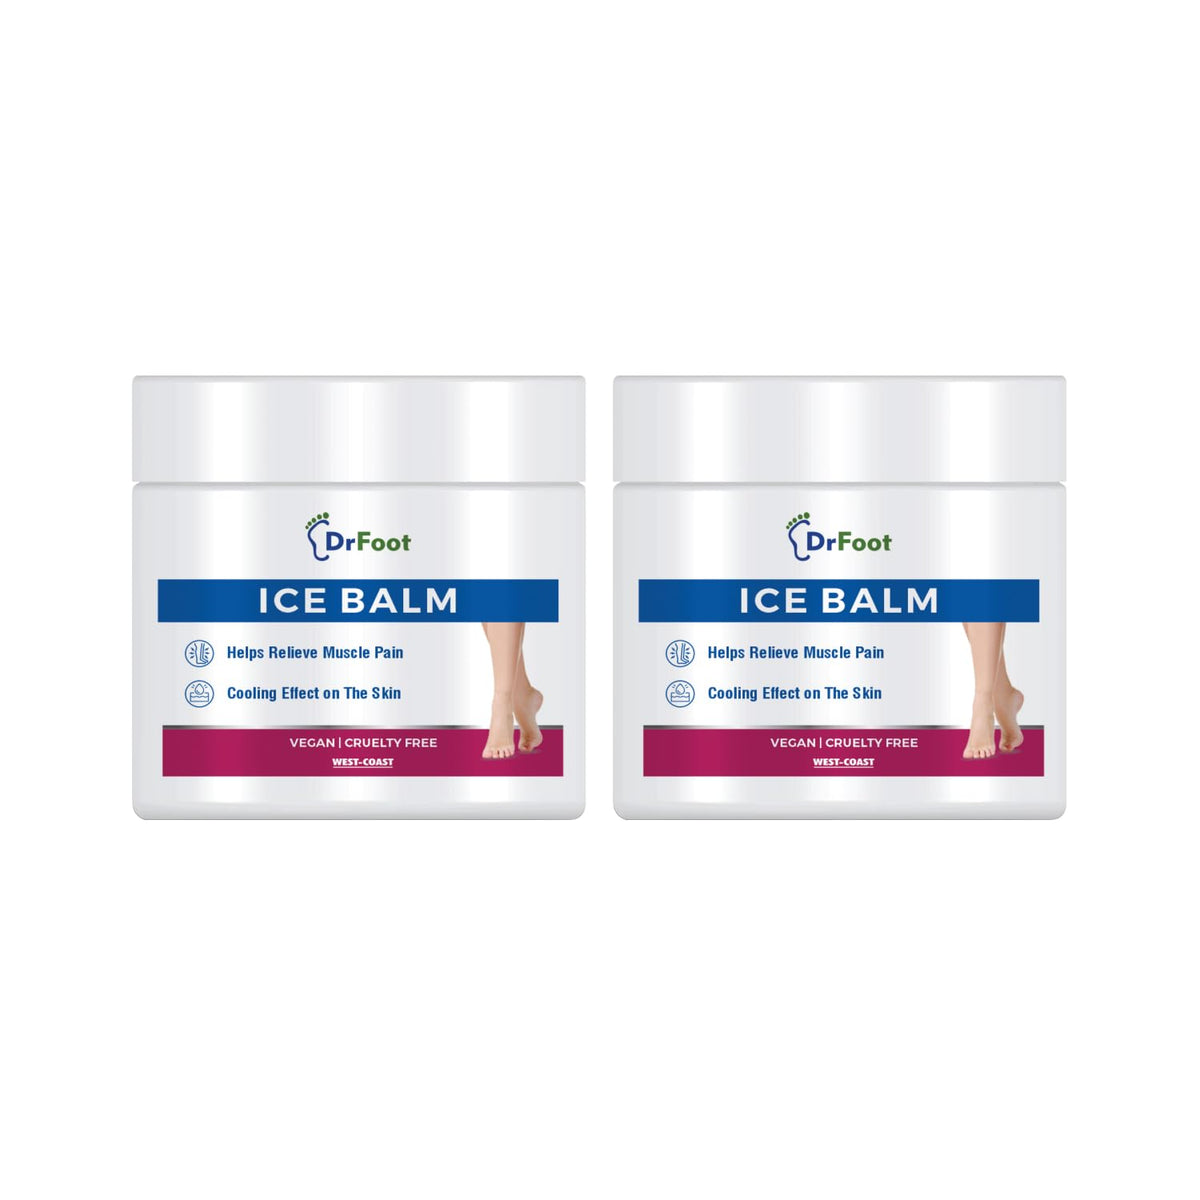 Dr Foot Ice Balm Cold with the Goodness of Menthol, Mentha Oil, Hemp Seed Oil, Glycerin - 100gm (Pack of 2)